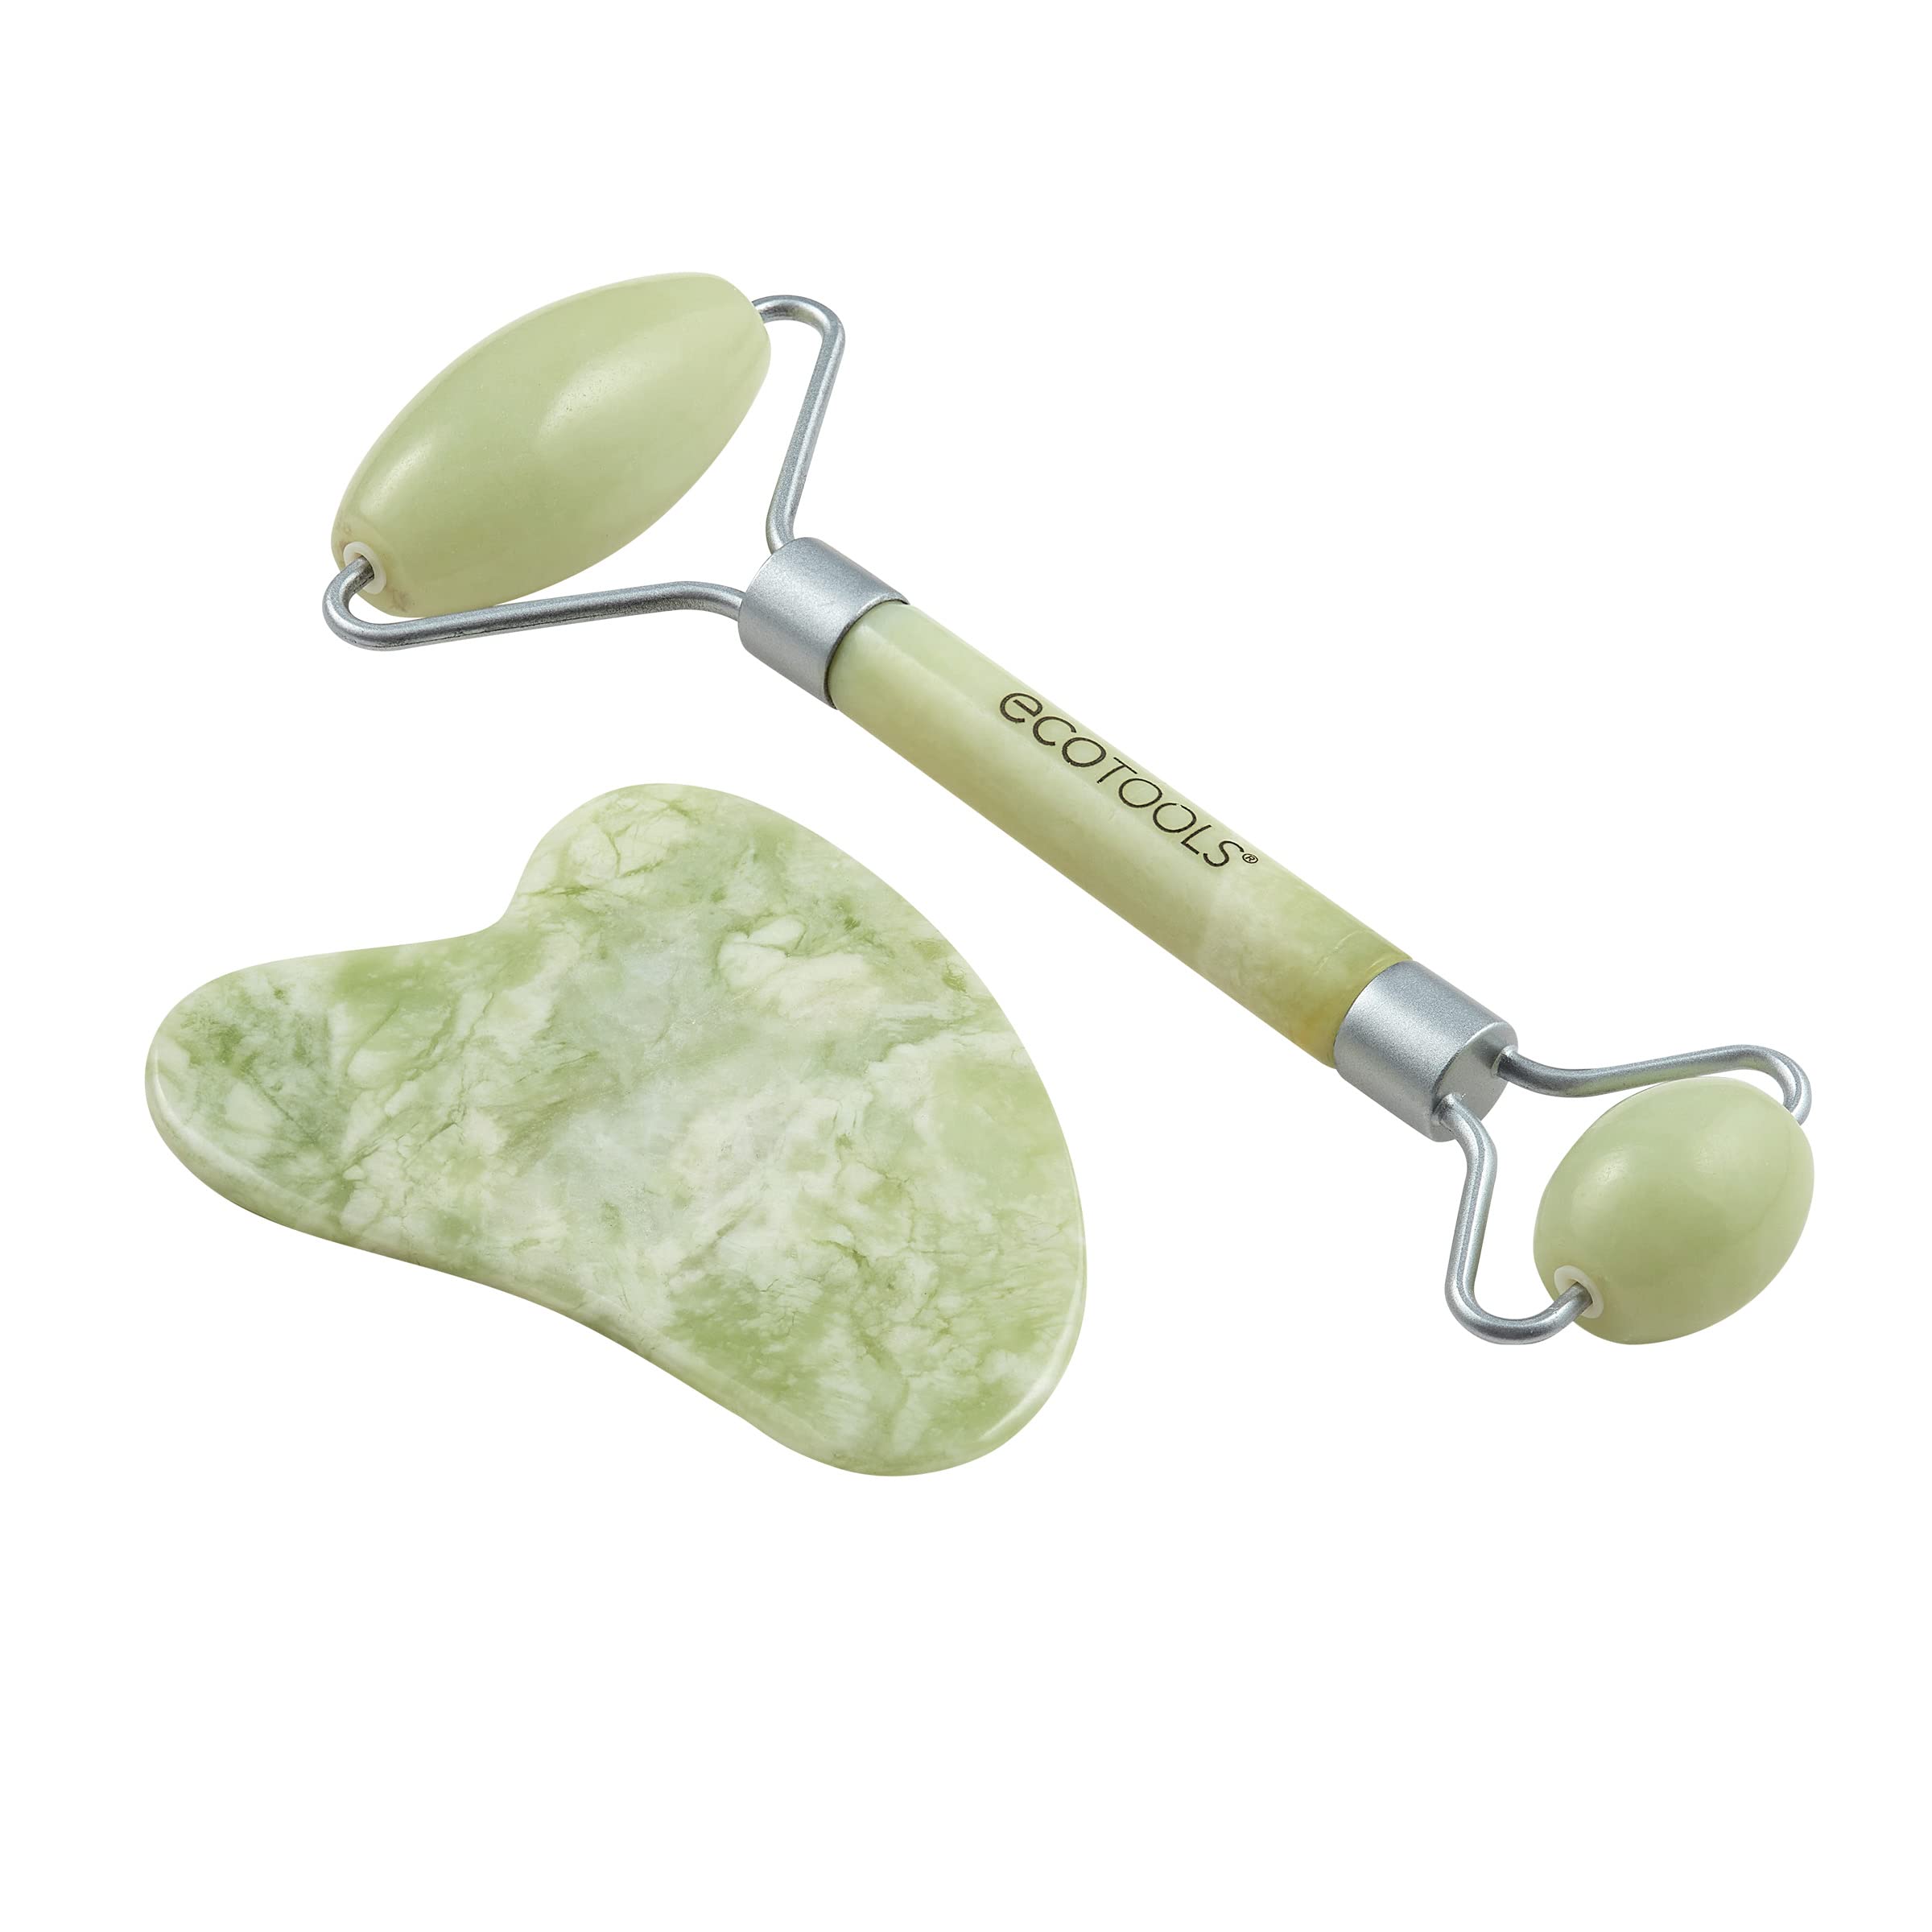 EcoTools Beauty Skin Care Tool Jade Facial Roller and Gua Sha Stone Duo, Face Roller and Massager, Skincare and Sculpting Tools, Green, Promotes Healthy Skin, Massager, 2 Piece Set, 1 Count